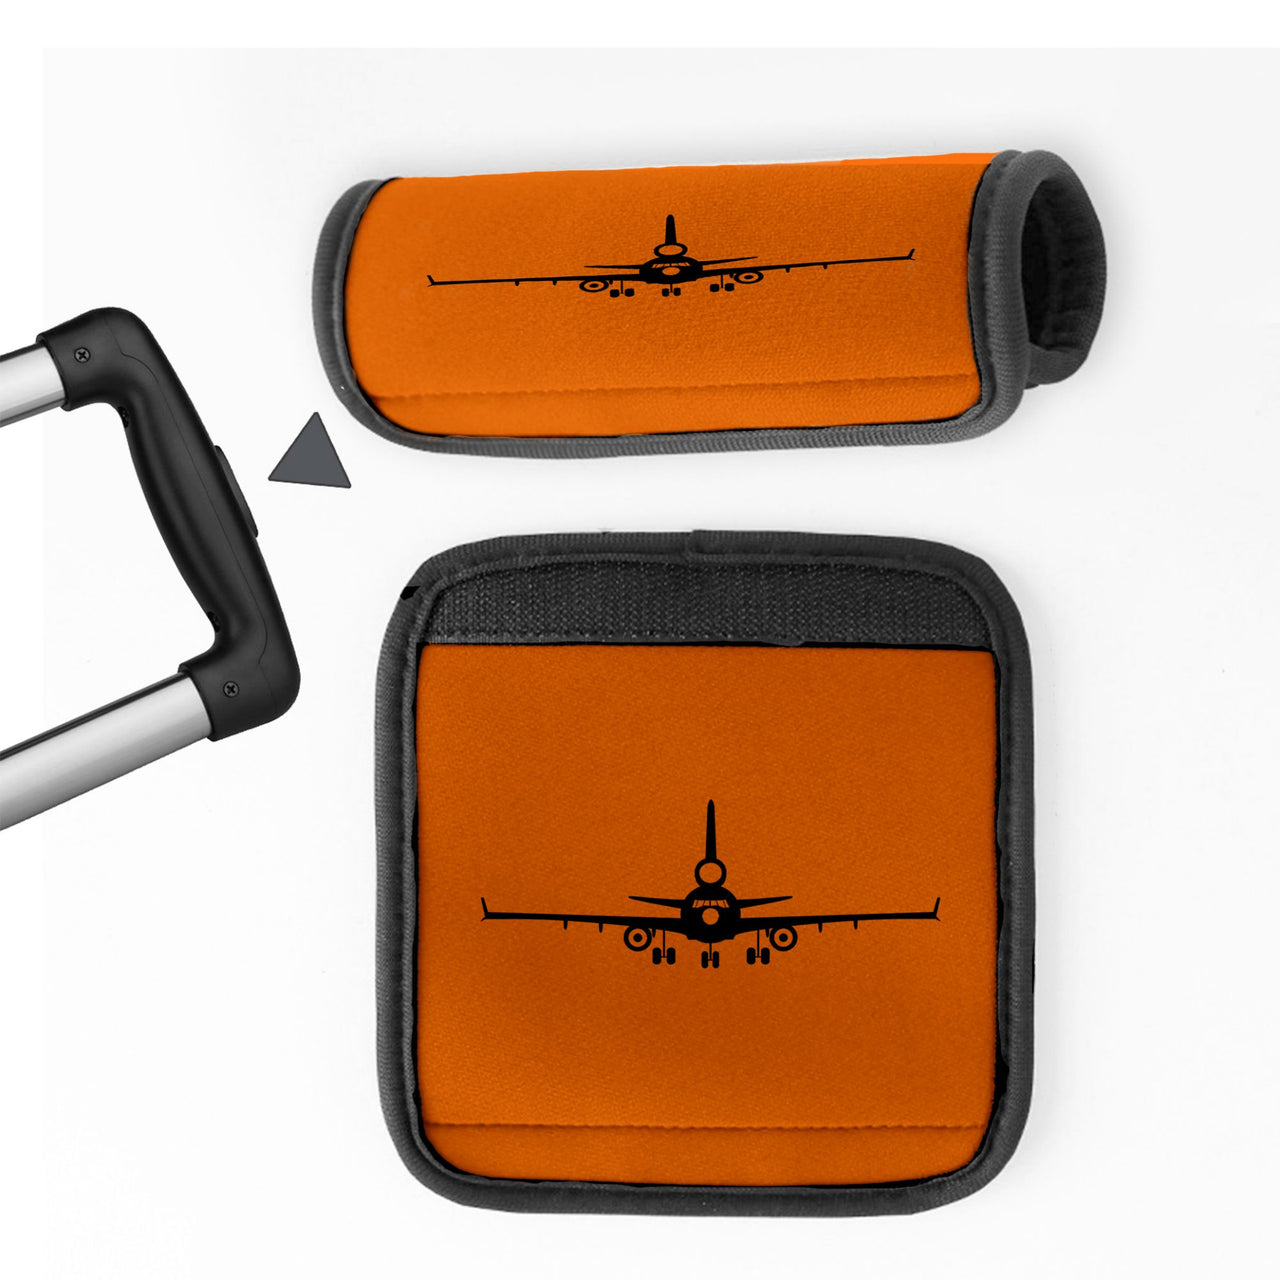 McDonnell Douglas MD-11 Silhouette Plane Designed Neoprene Luggage Handle Covers